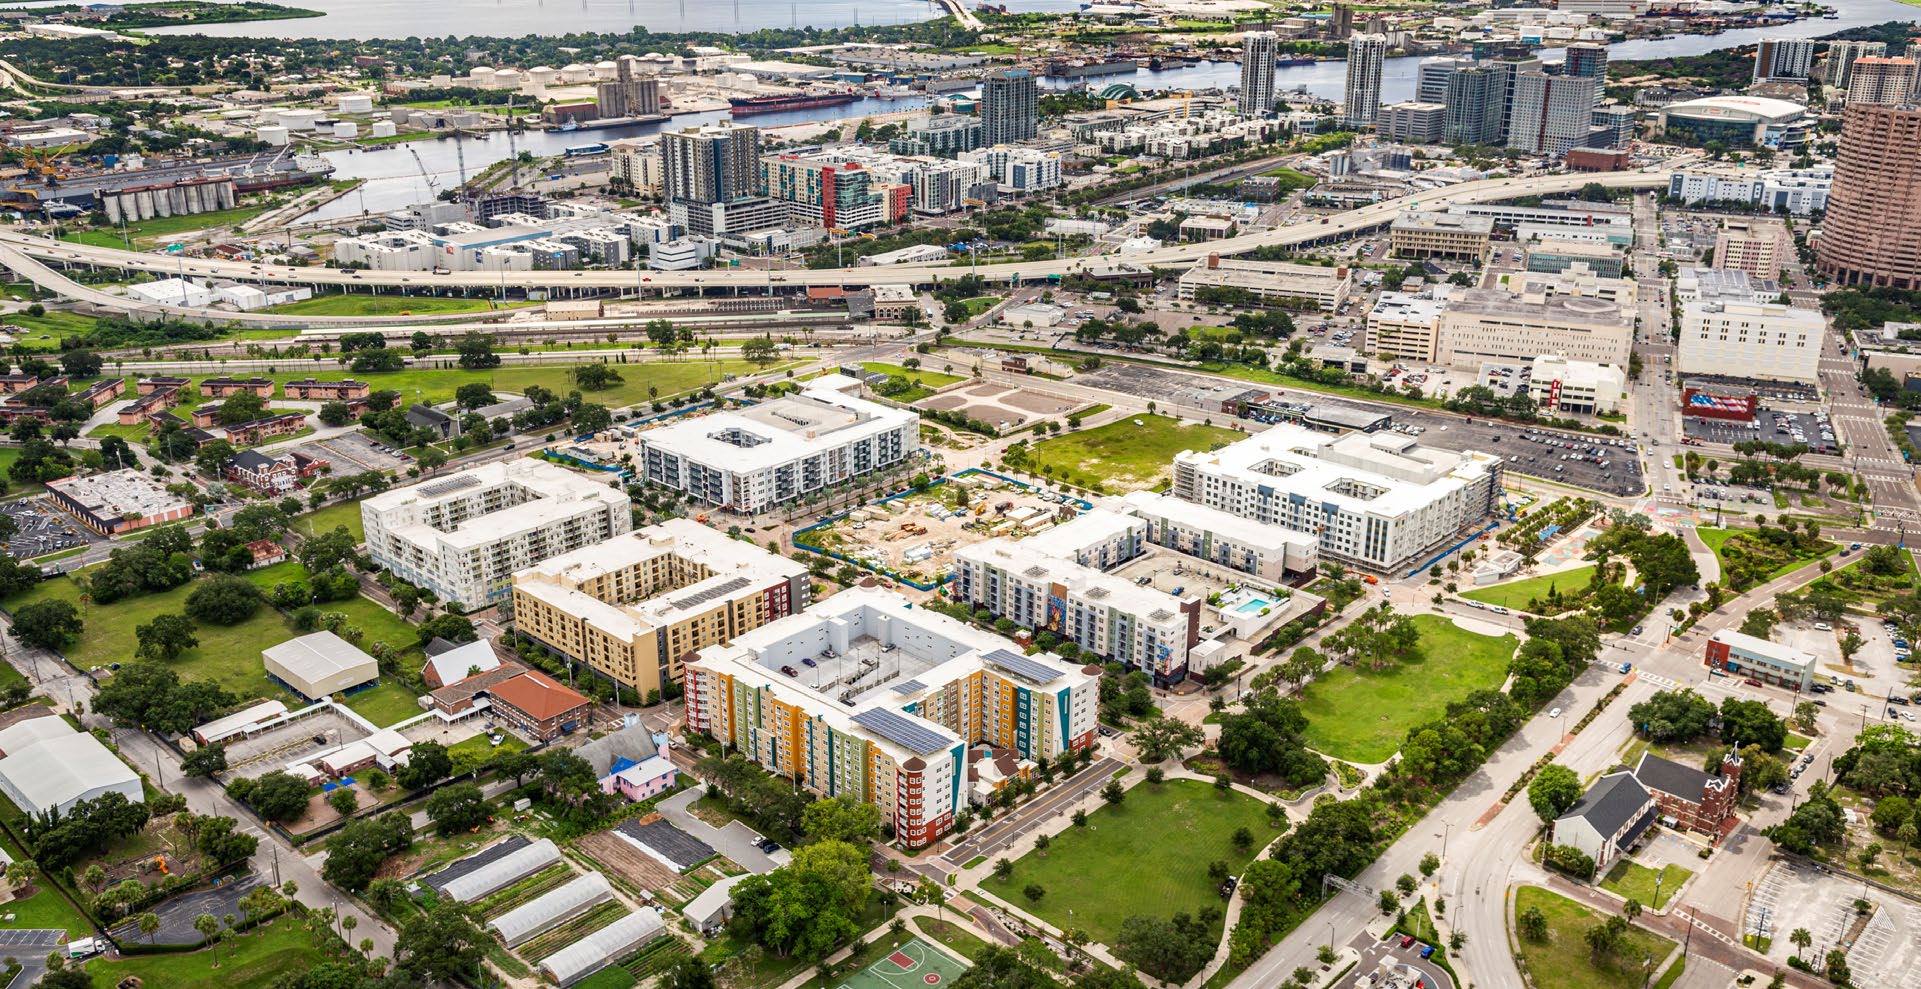 Aerial View of the Encore Buildings (Reed, Ella, Tempo, Trio), Job Training Center, Urban Farm, St. James Church, Solar Art at Technology Park, the Independence, Legacy, and Lot 12 (Adderley)